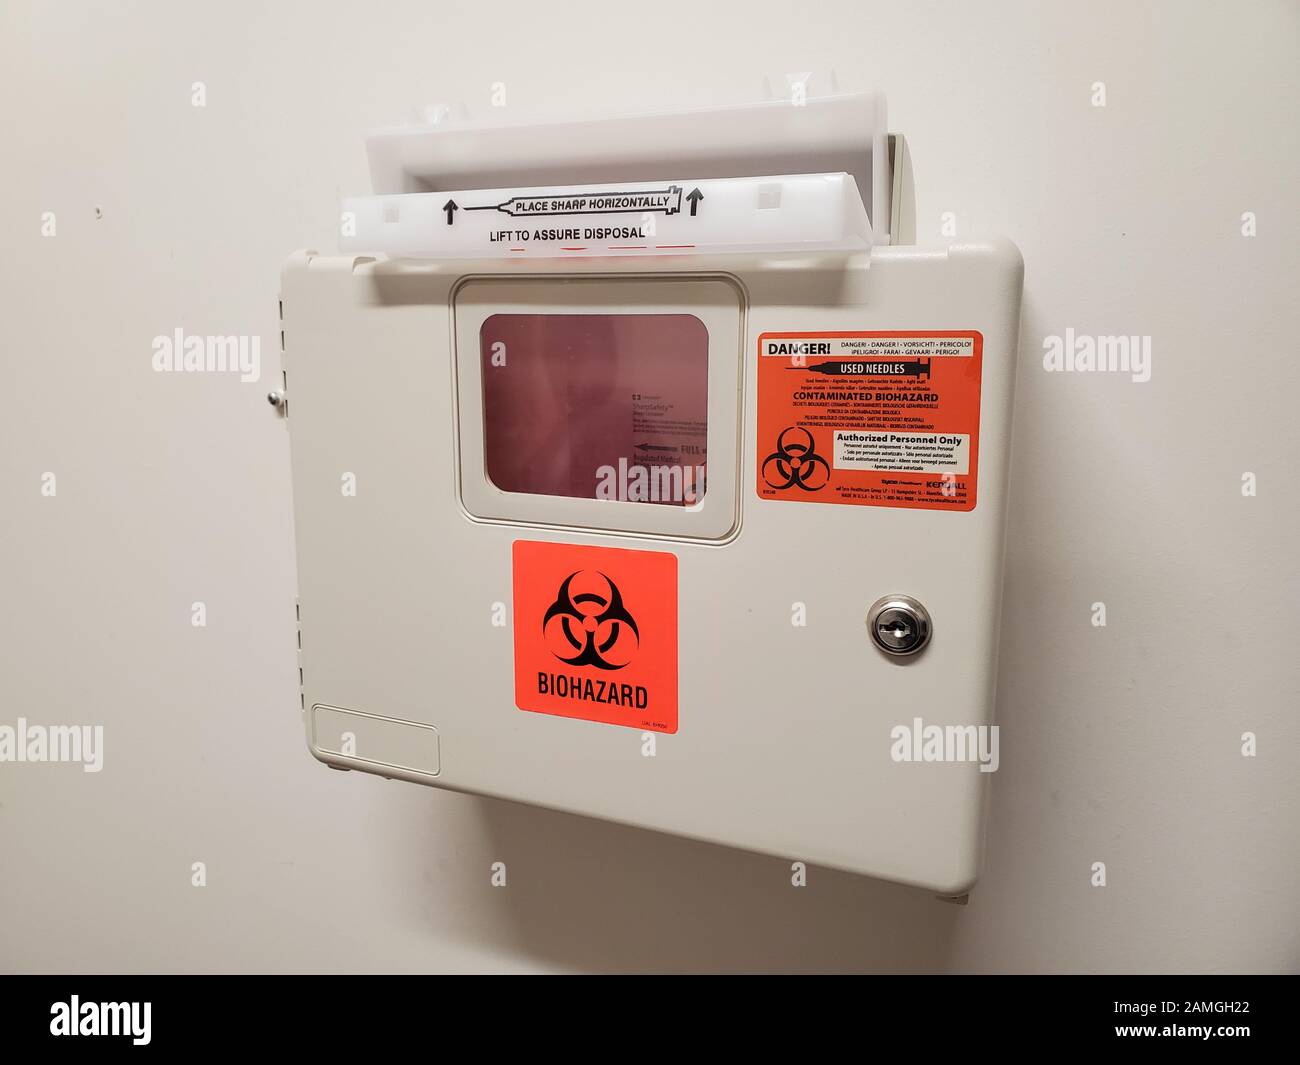 Wall mounted sharps disposal container in medical clinic setting, San Francisco, California, December 3, 2019. () Stock Photo